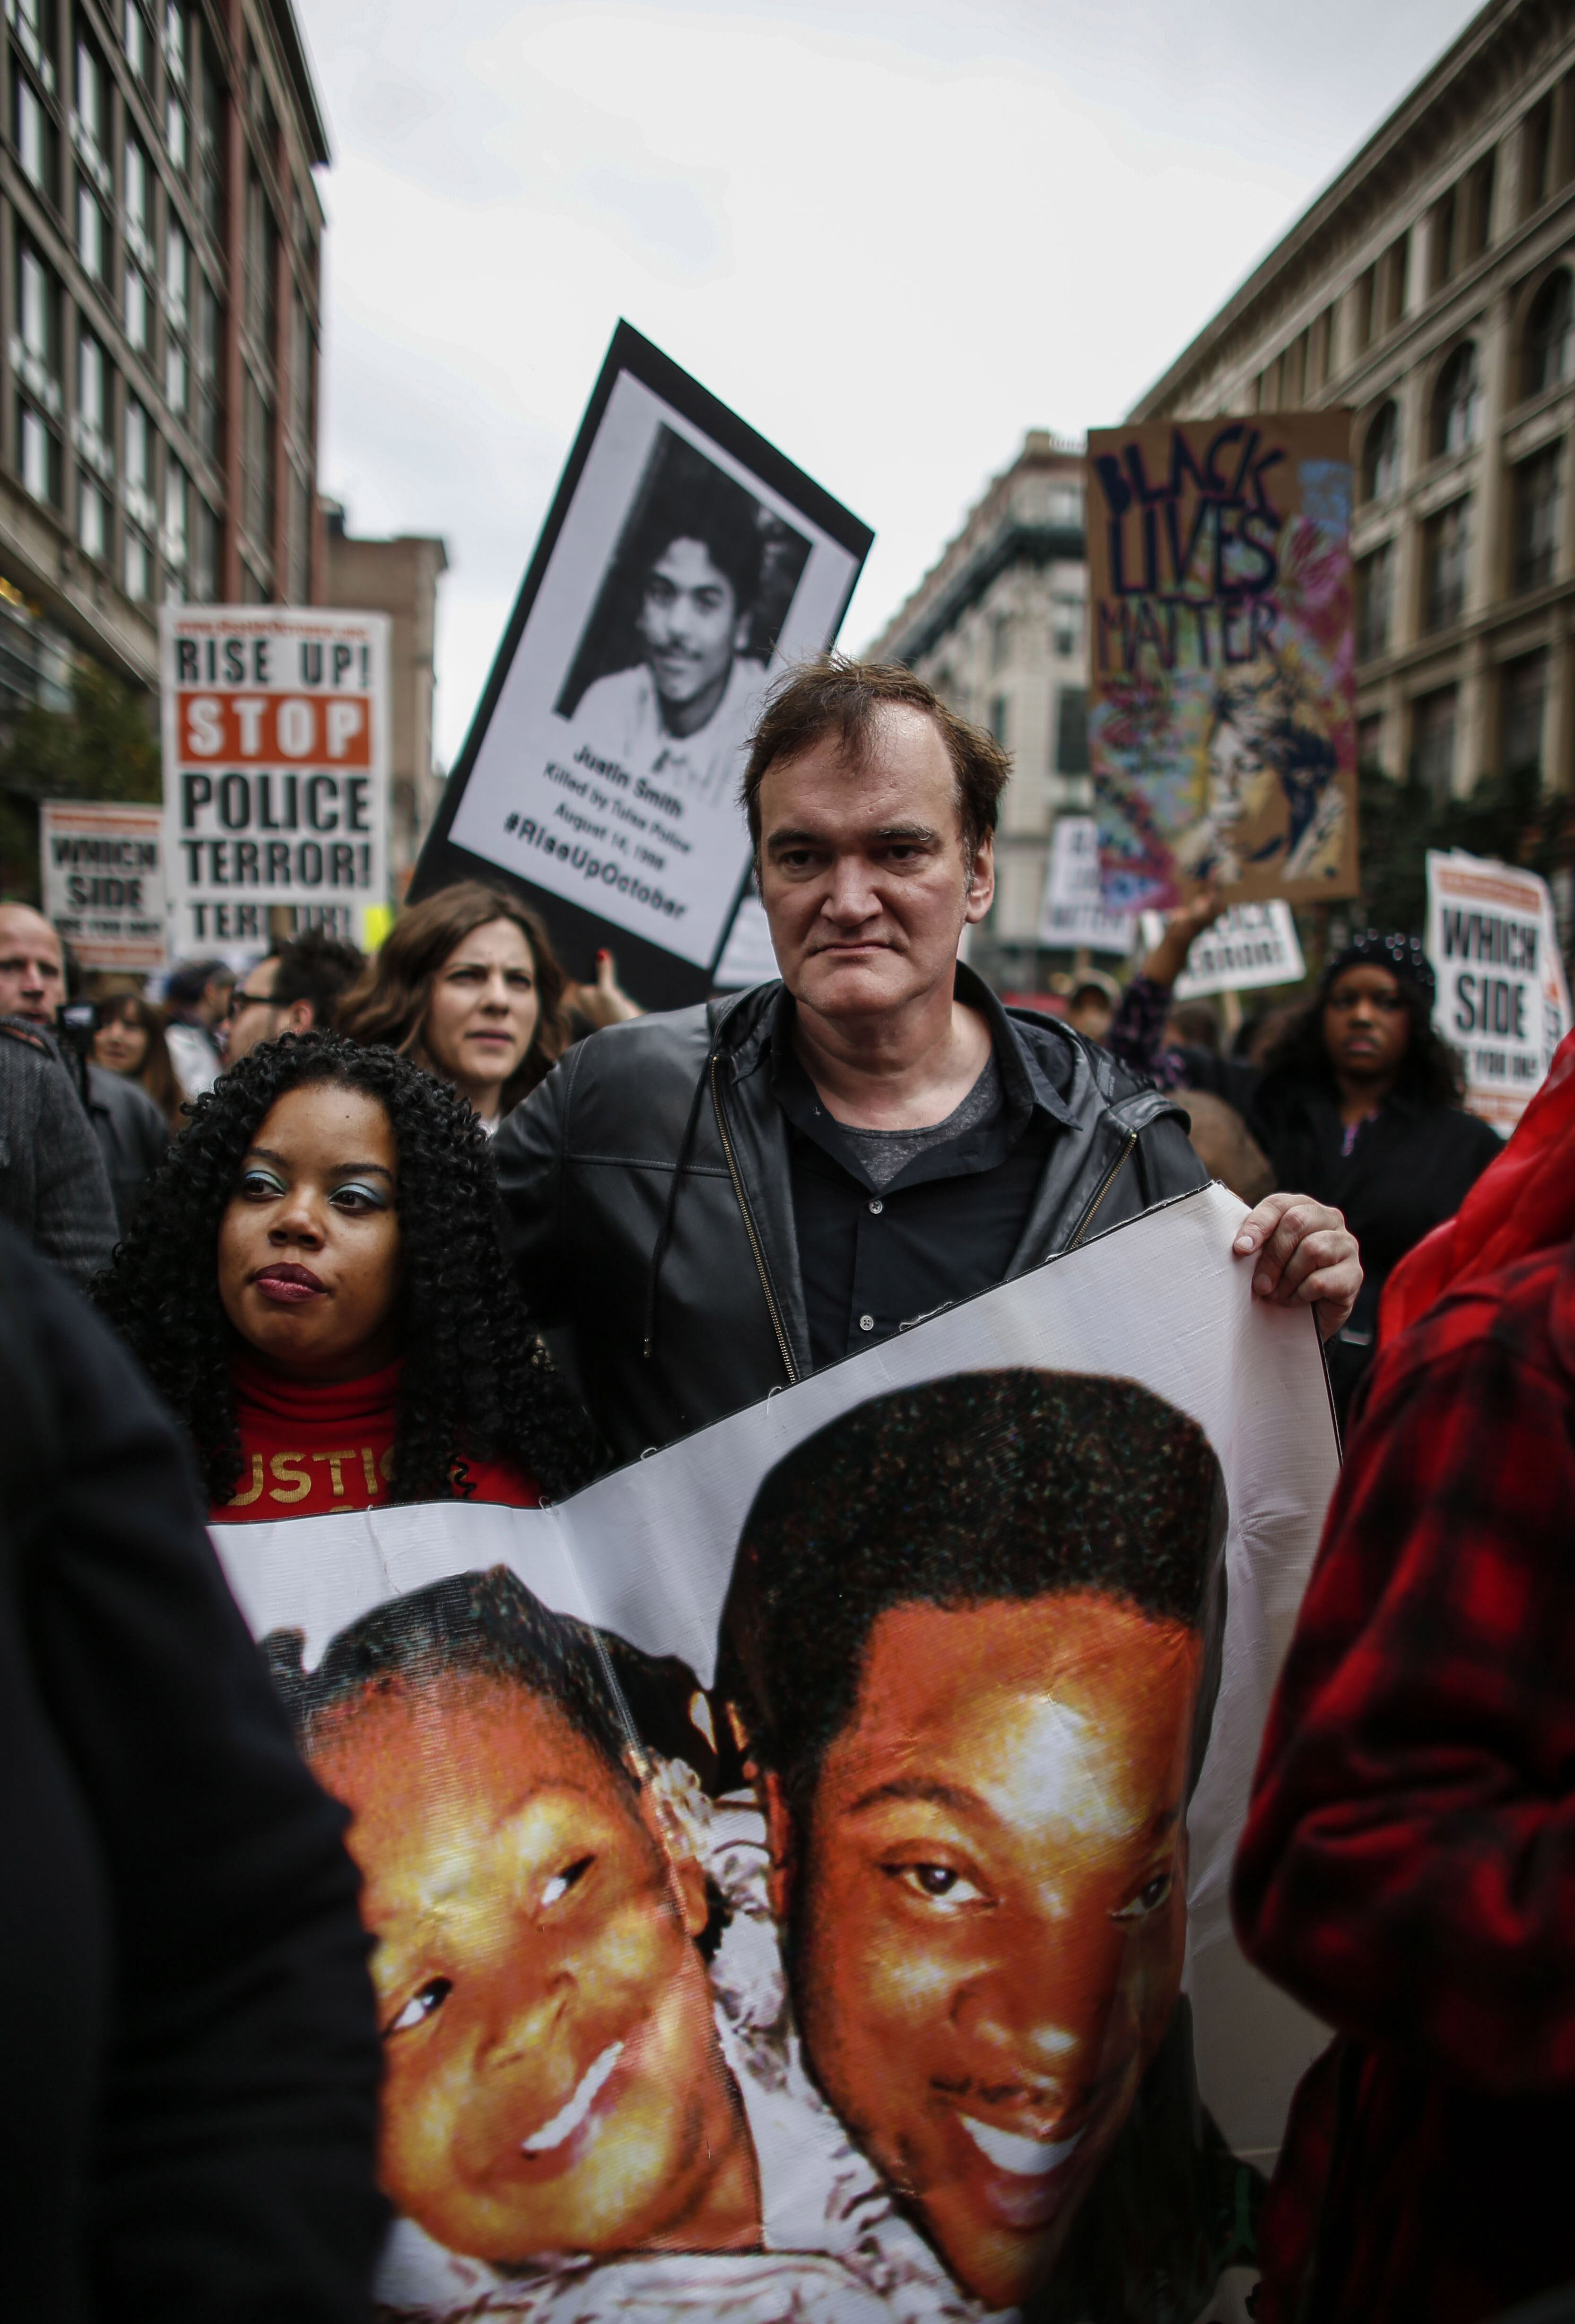 NEW YORK, NY - OCTOBER 24: Director Quentin Tarantino attends a march to denounce police brutality in Washington Square Park October 24, 2015 in New York City. The rally is part of a three-day demonstration against officer-involved abuse and killing. (Photo by Kena Betancur/Getty Images)